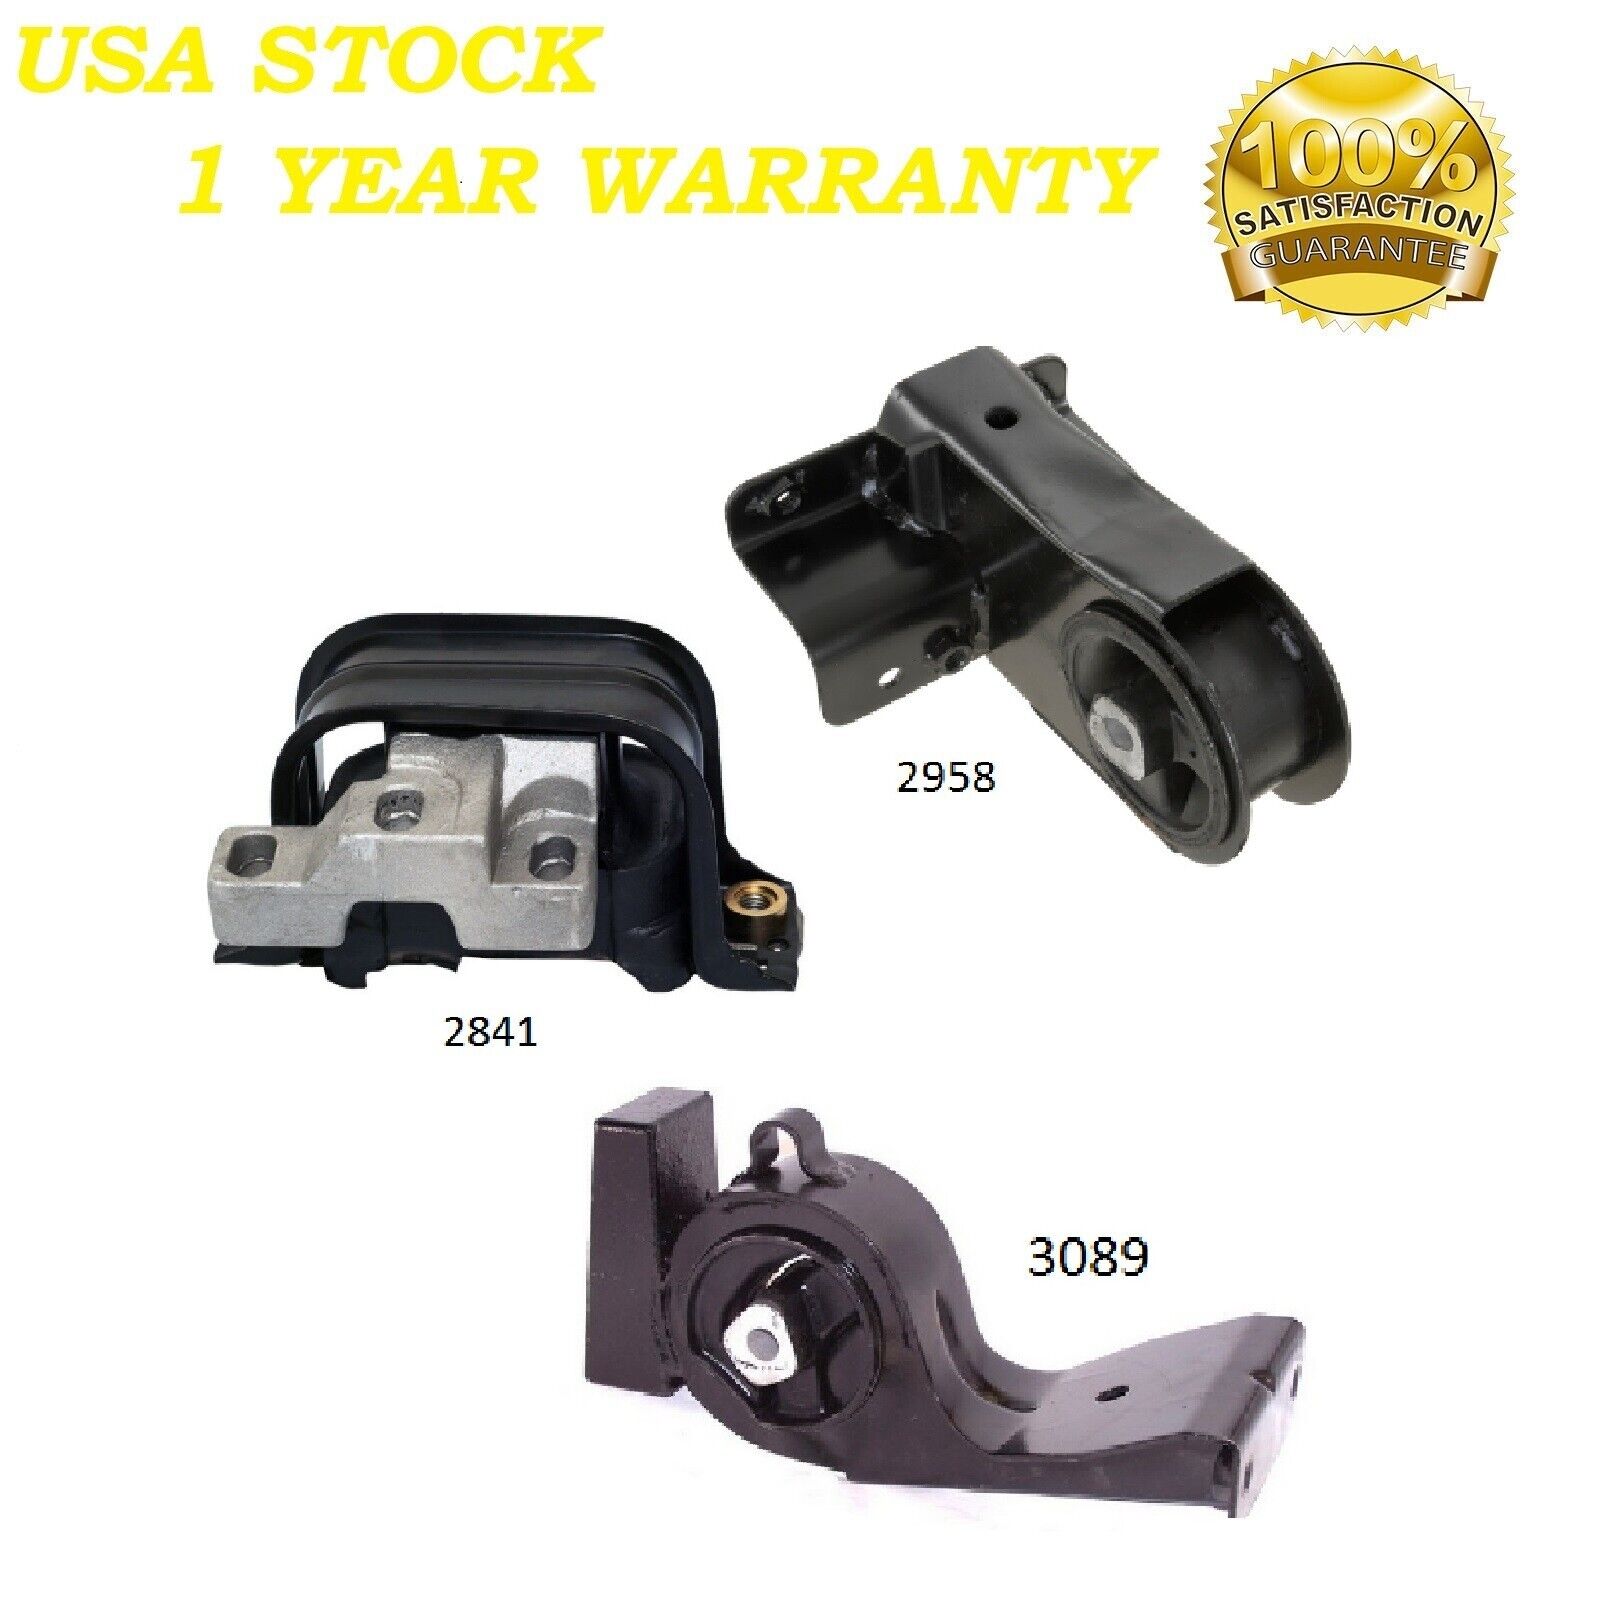 3PCS FRONT & REAR MOTOR MOUNT FIT 1997-2006 Dodge Stratus 2.0L (FROM 12/2/1997)